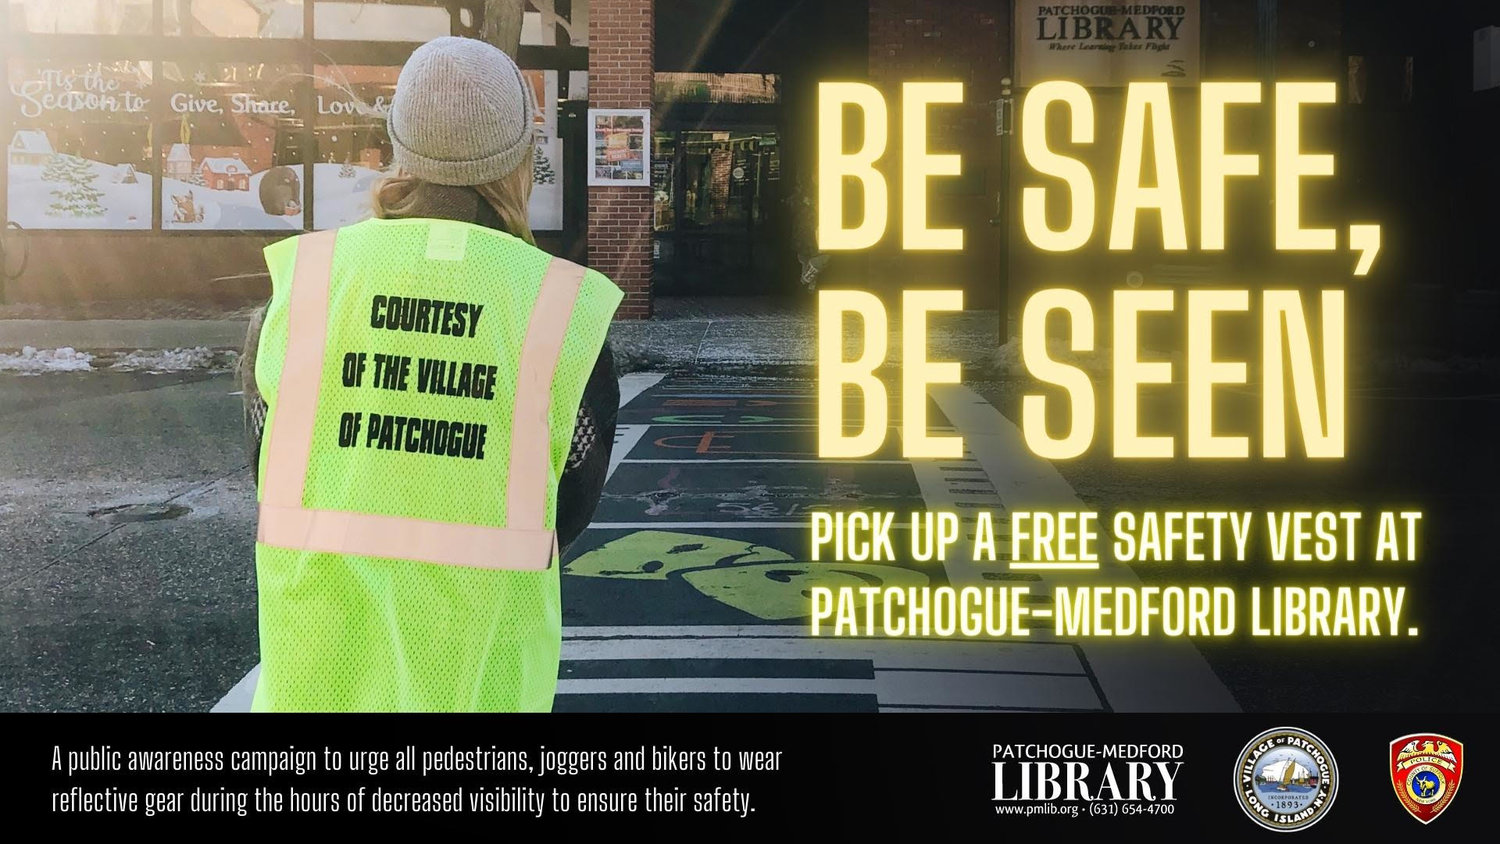 Patchogue-Medford Library employee Hanna Auer crosses the street, safely, in the new reflective gear.